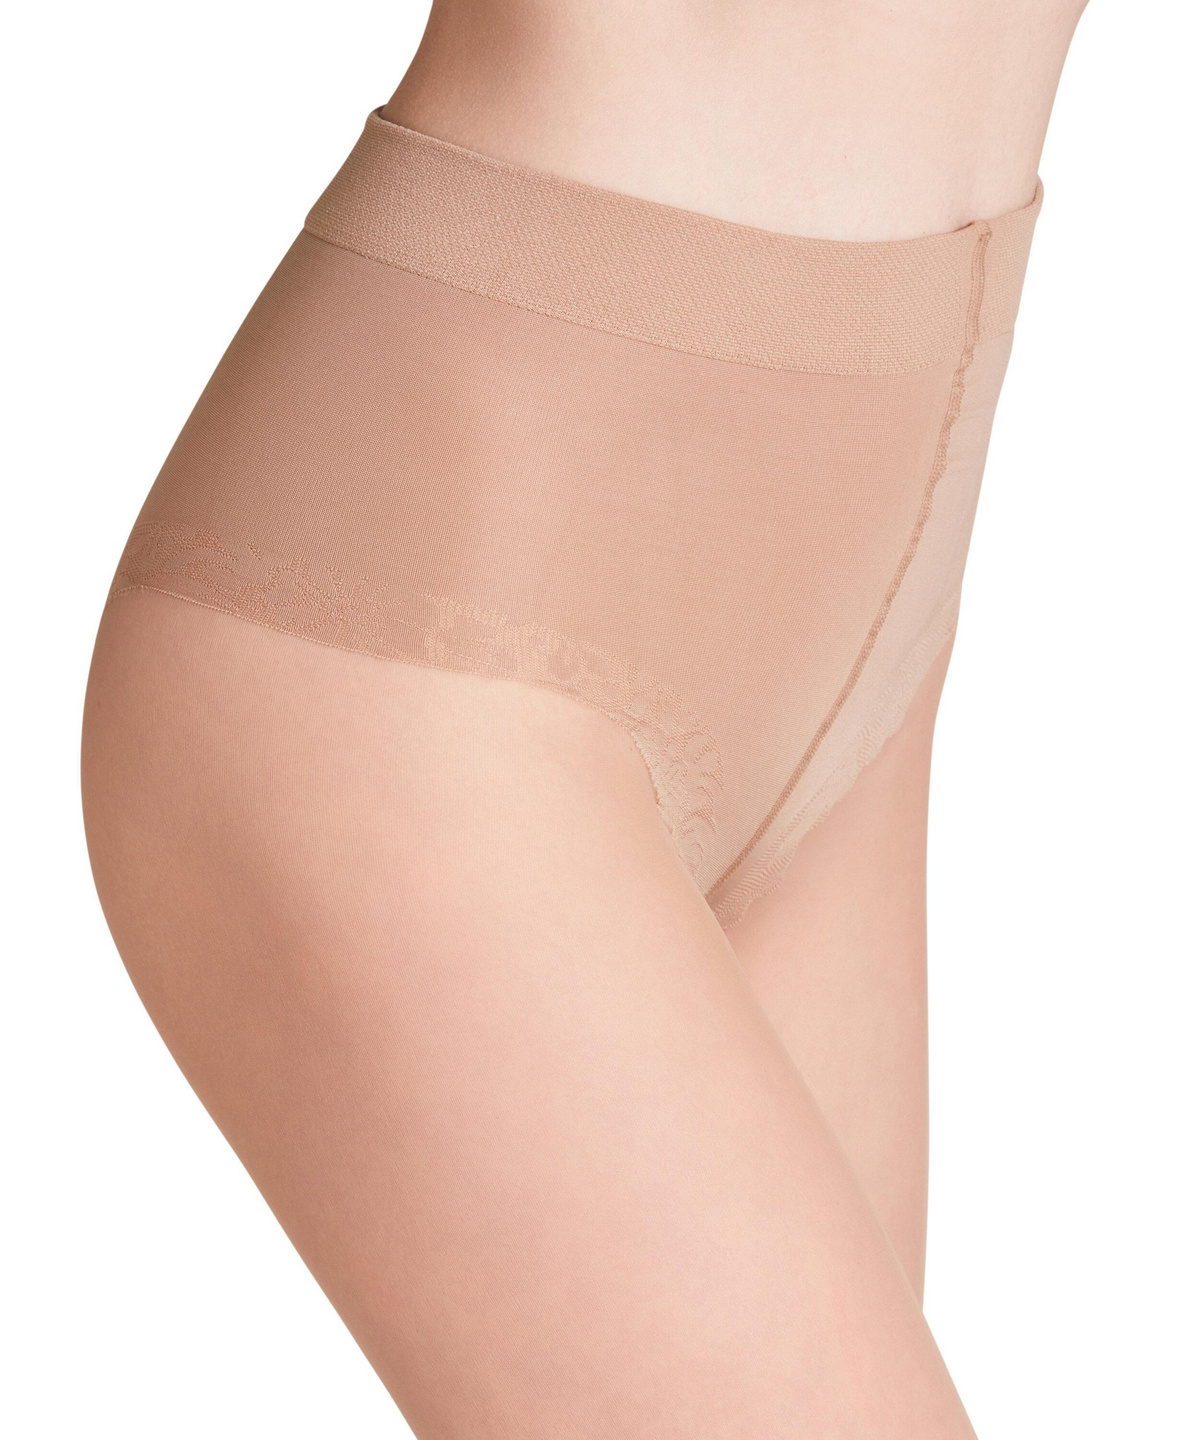 Colour: Cocoon Falke 20 Dinner Cellulite Control Tights Size: S / M RRP £45 